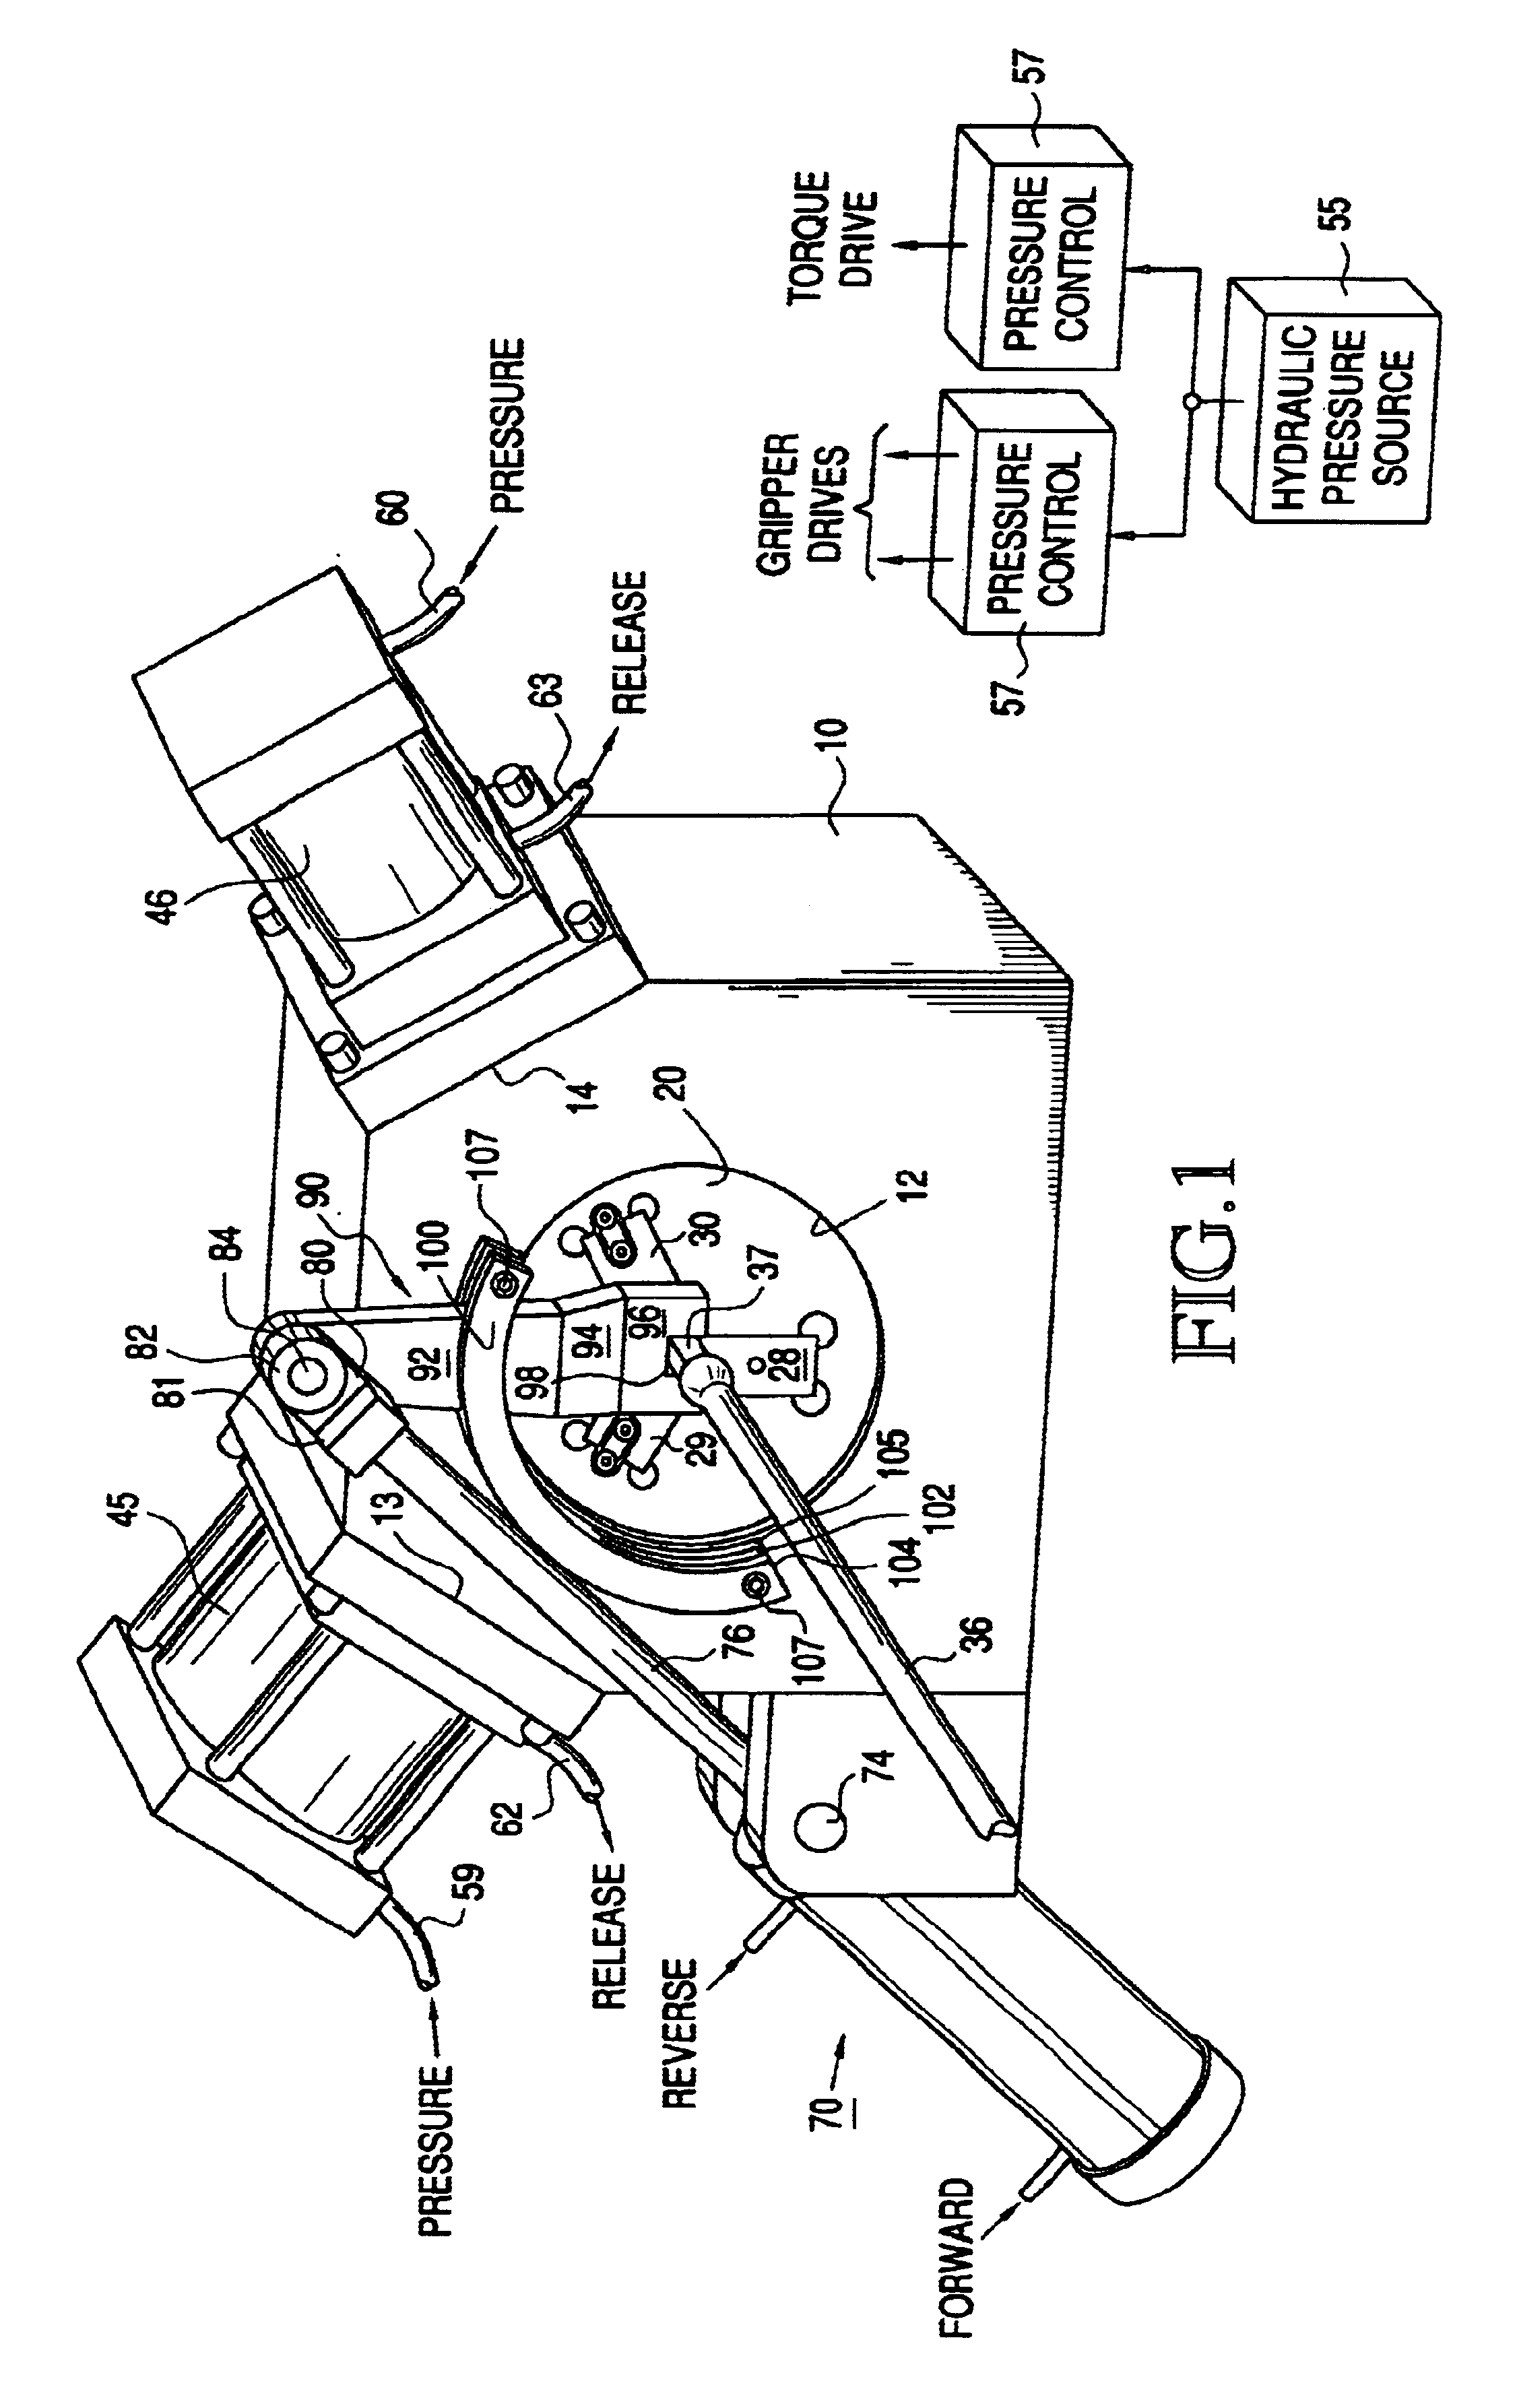 Threaded connection engagement and disengagement system and method